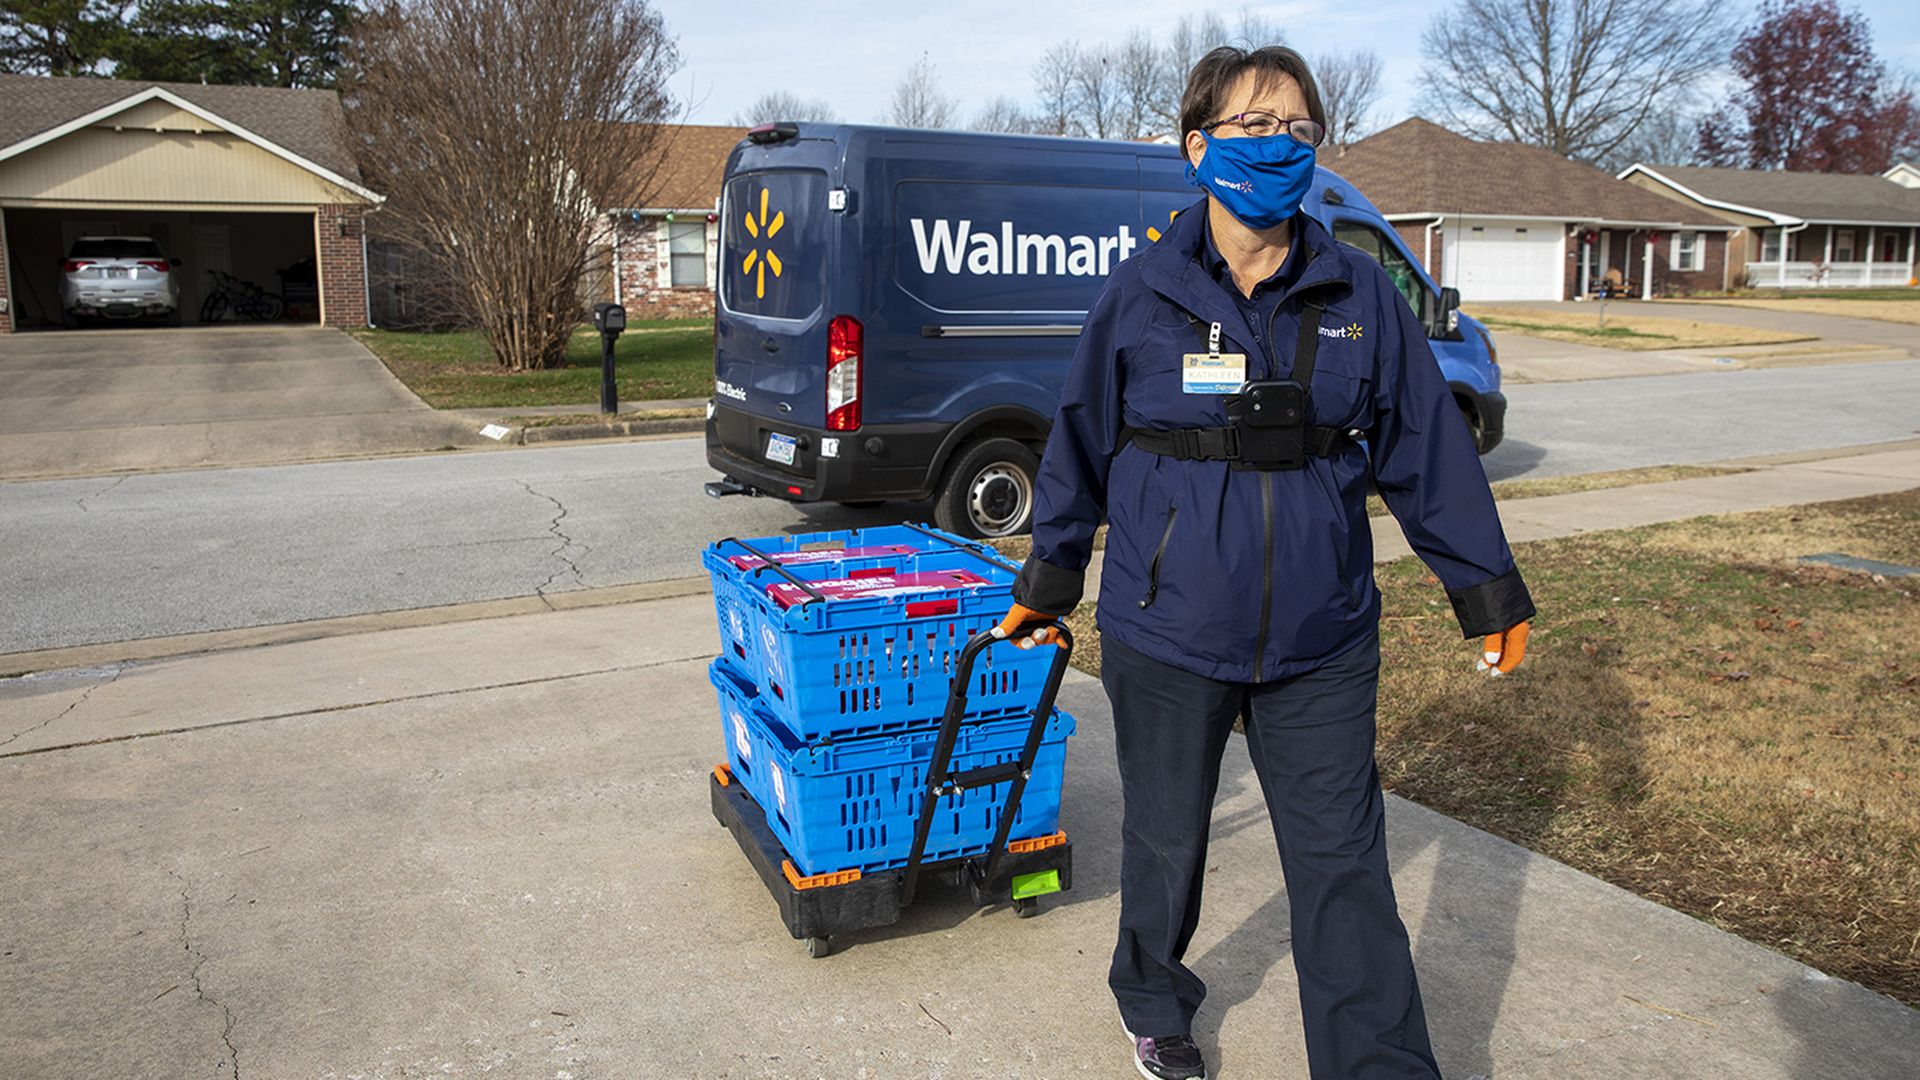 A Walmart worker delivering groceries to someone's home.